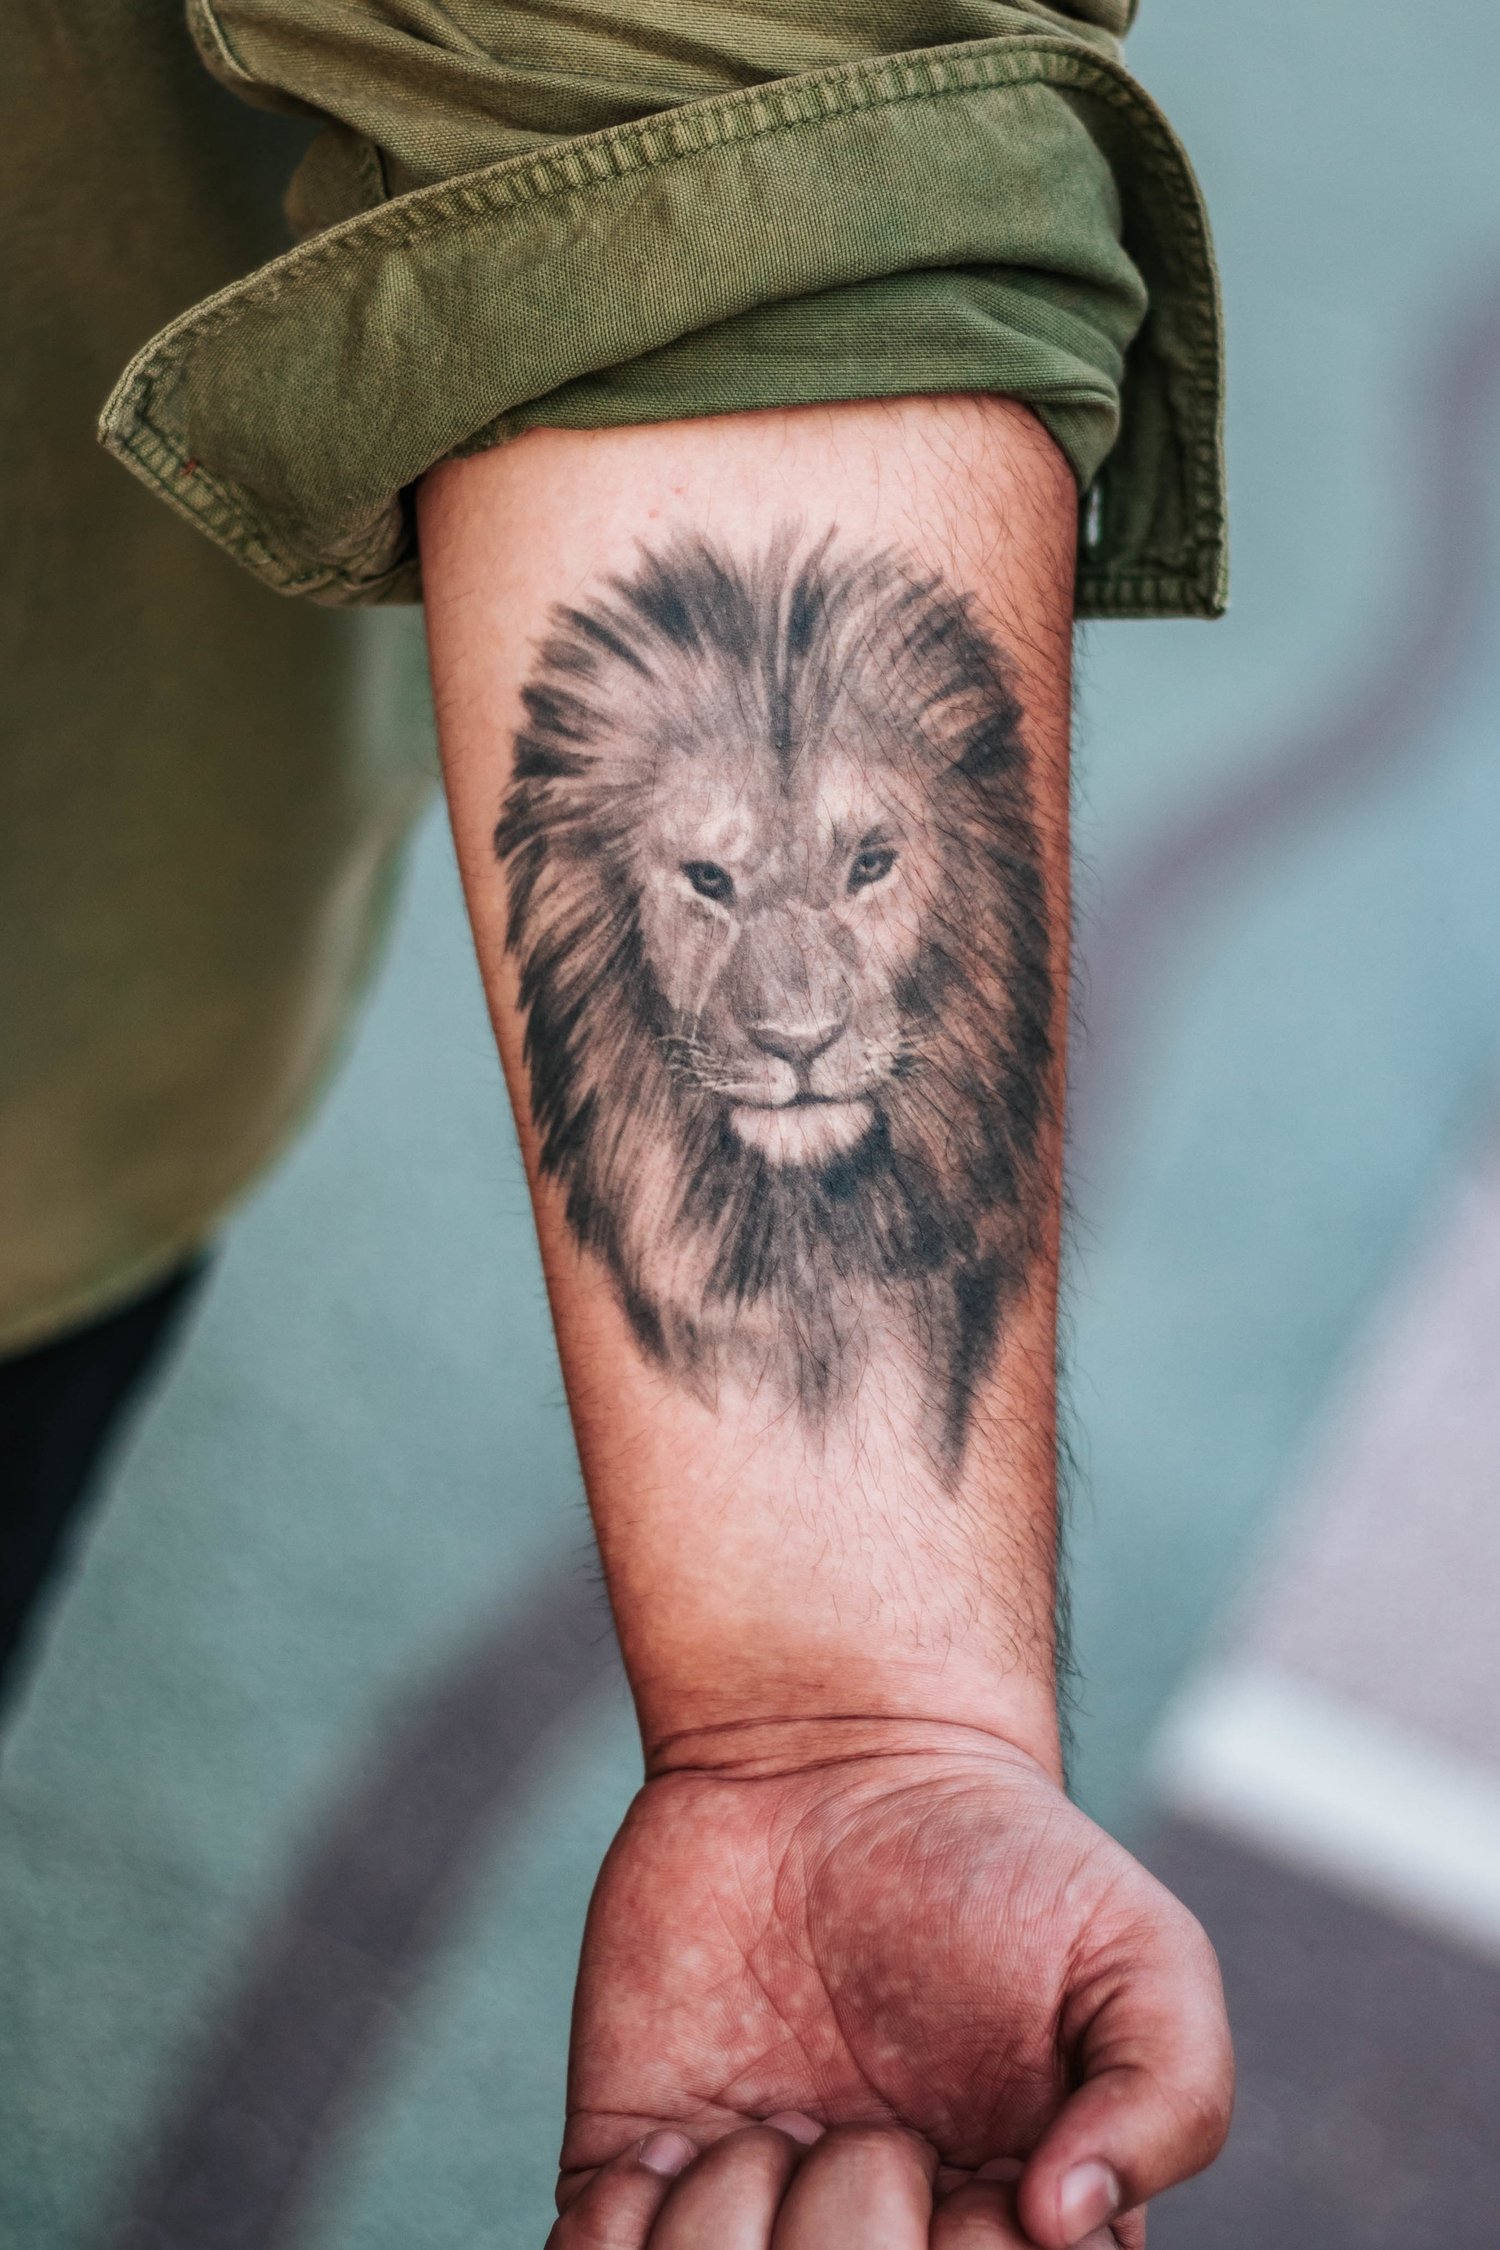 Is God Against Tattoos? — Grace Bible Fellowship